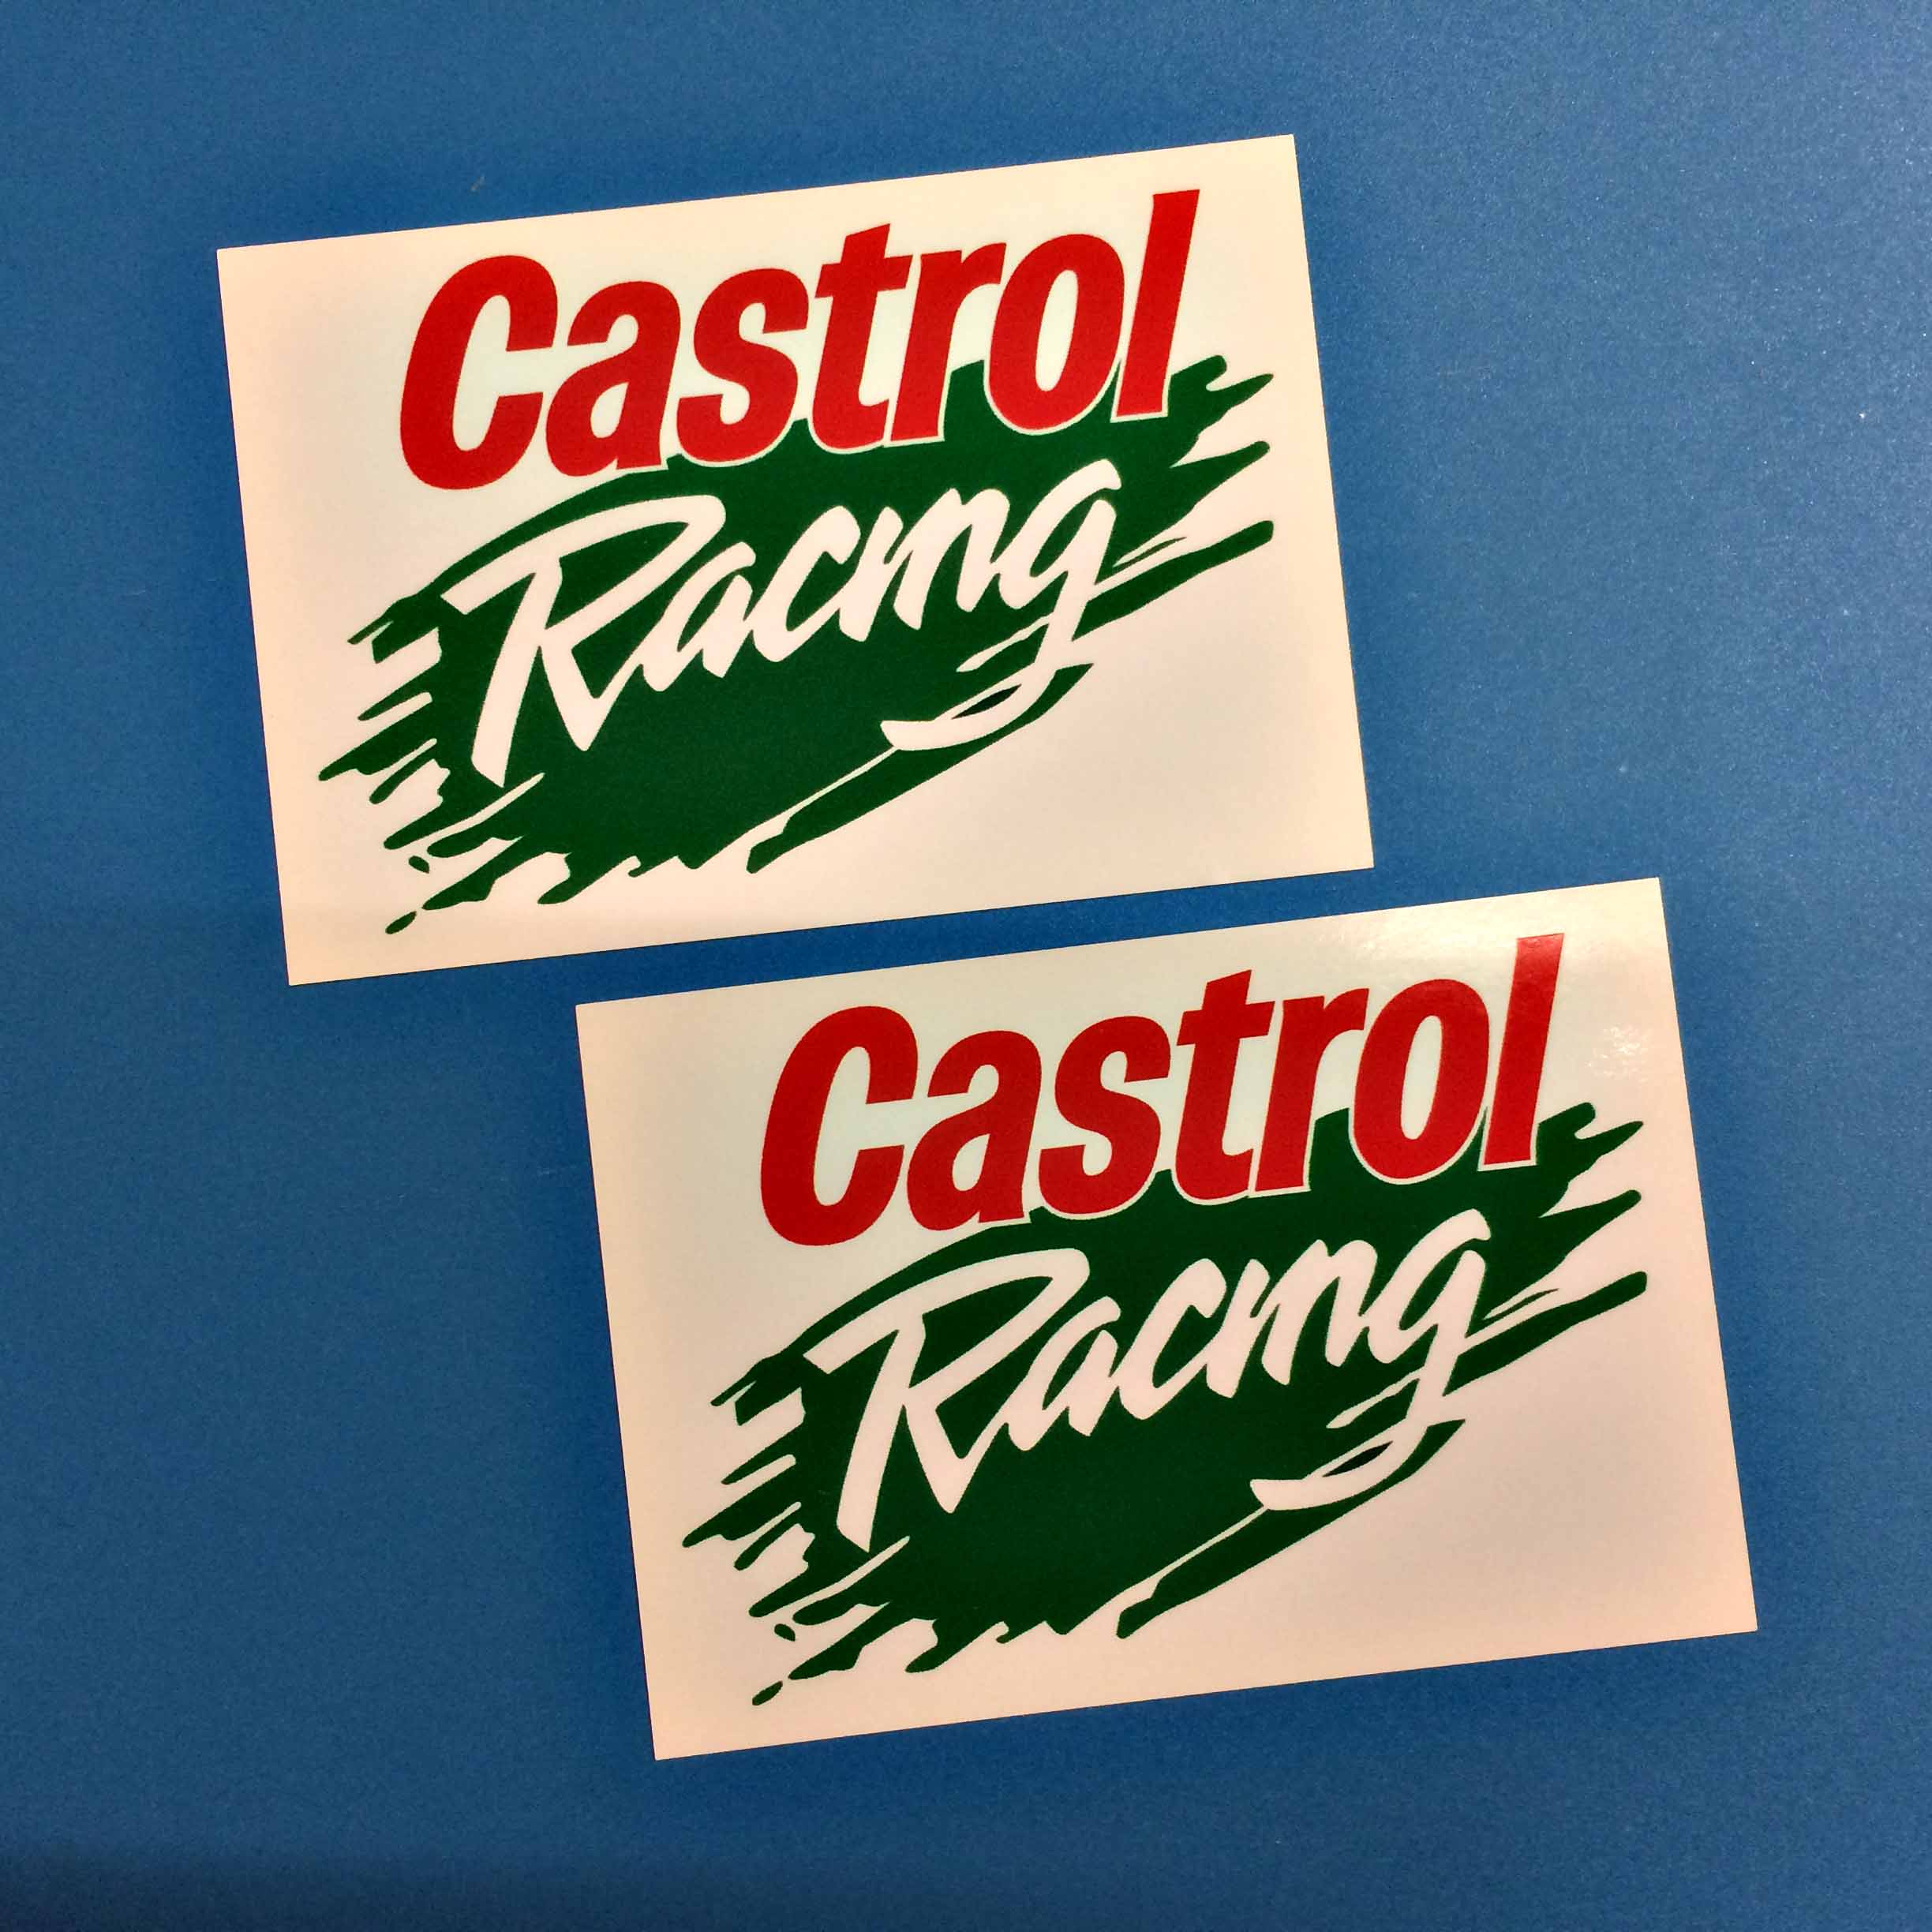 CASTROL RACING OIL STICKERS. A white sticker with a green brush stroke in the centre. Castrol in red and Racing in white lettering overlays this.